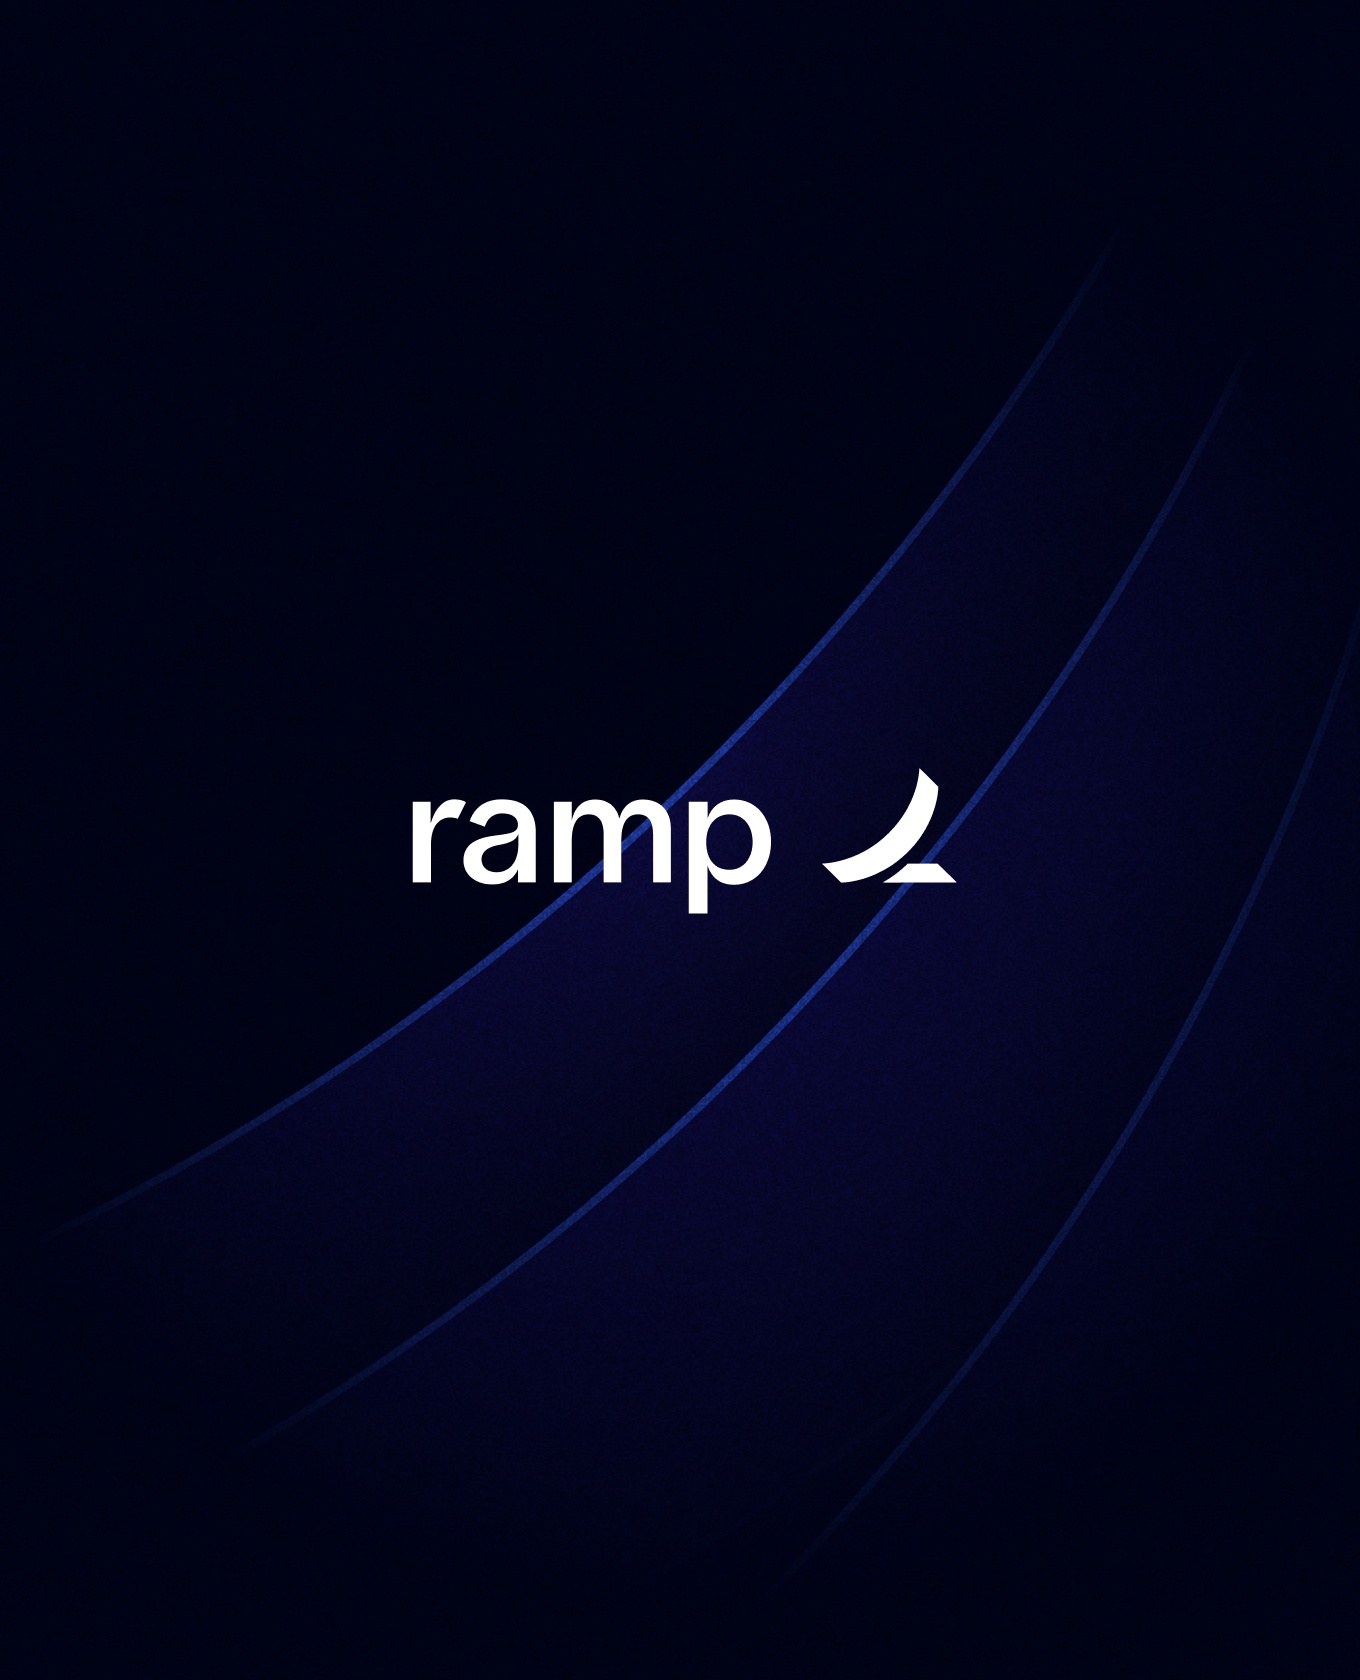 The Ramp wordmark against a dark but vibrant blue background composed of abstract and expanded shapes from the wordmark.